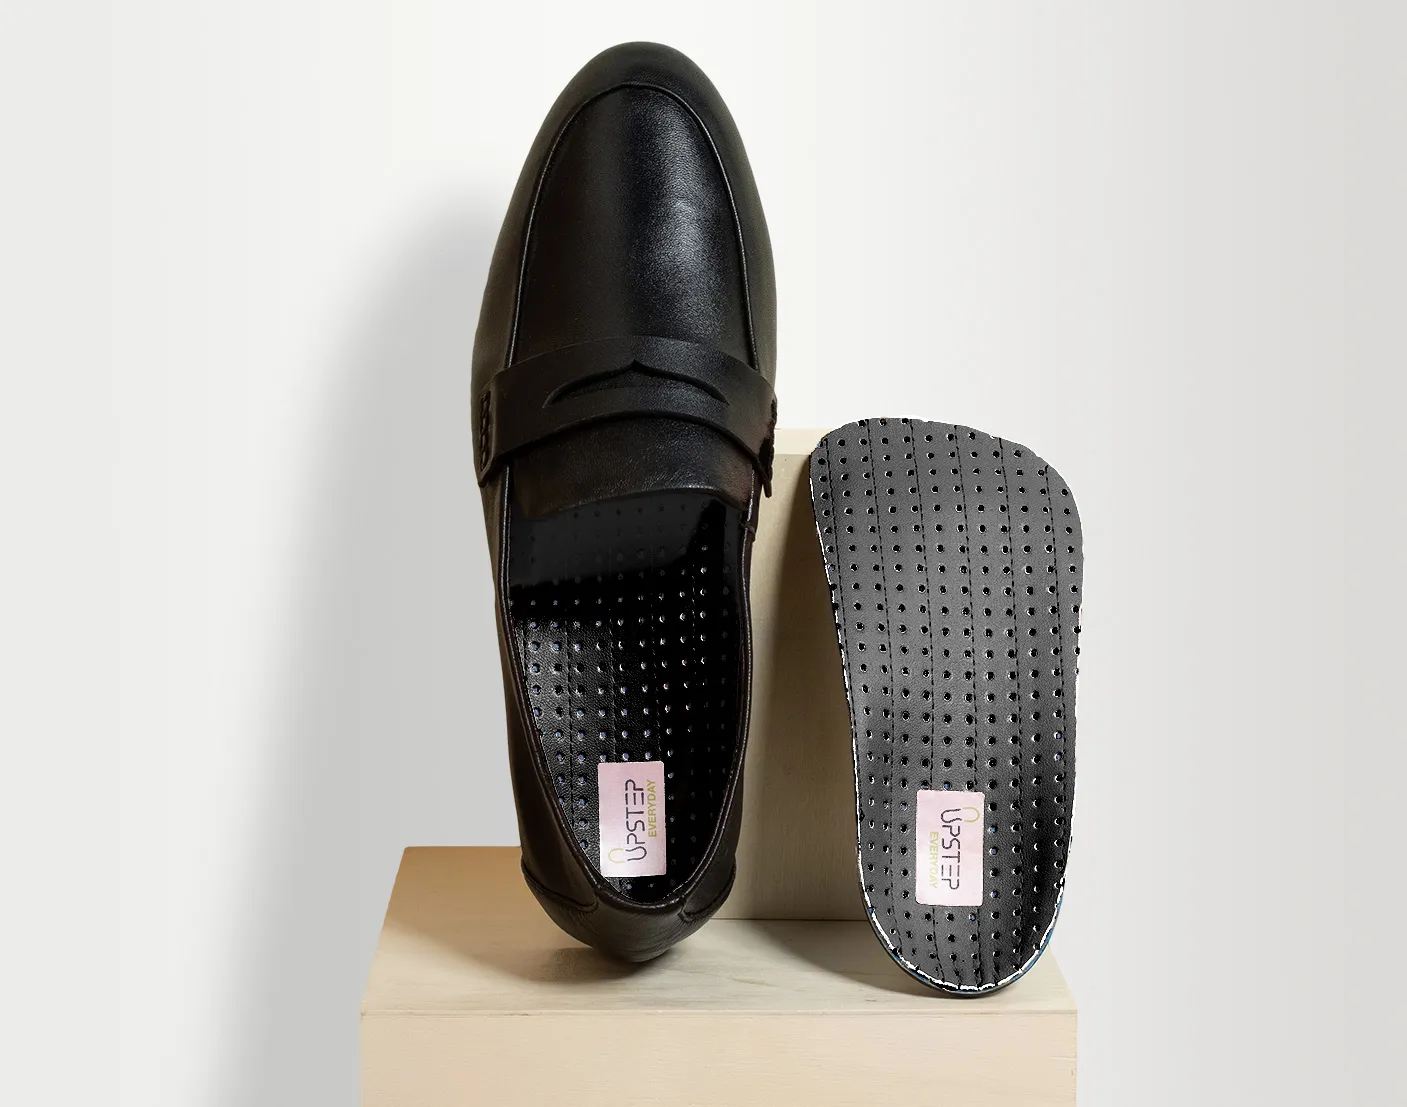 Upstep's On My Feet All Day shoe orthotics presented in a pair of black leather shoes.